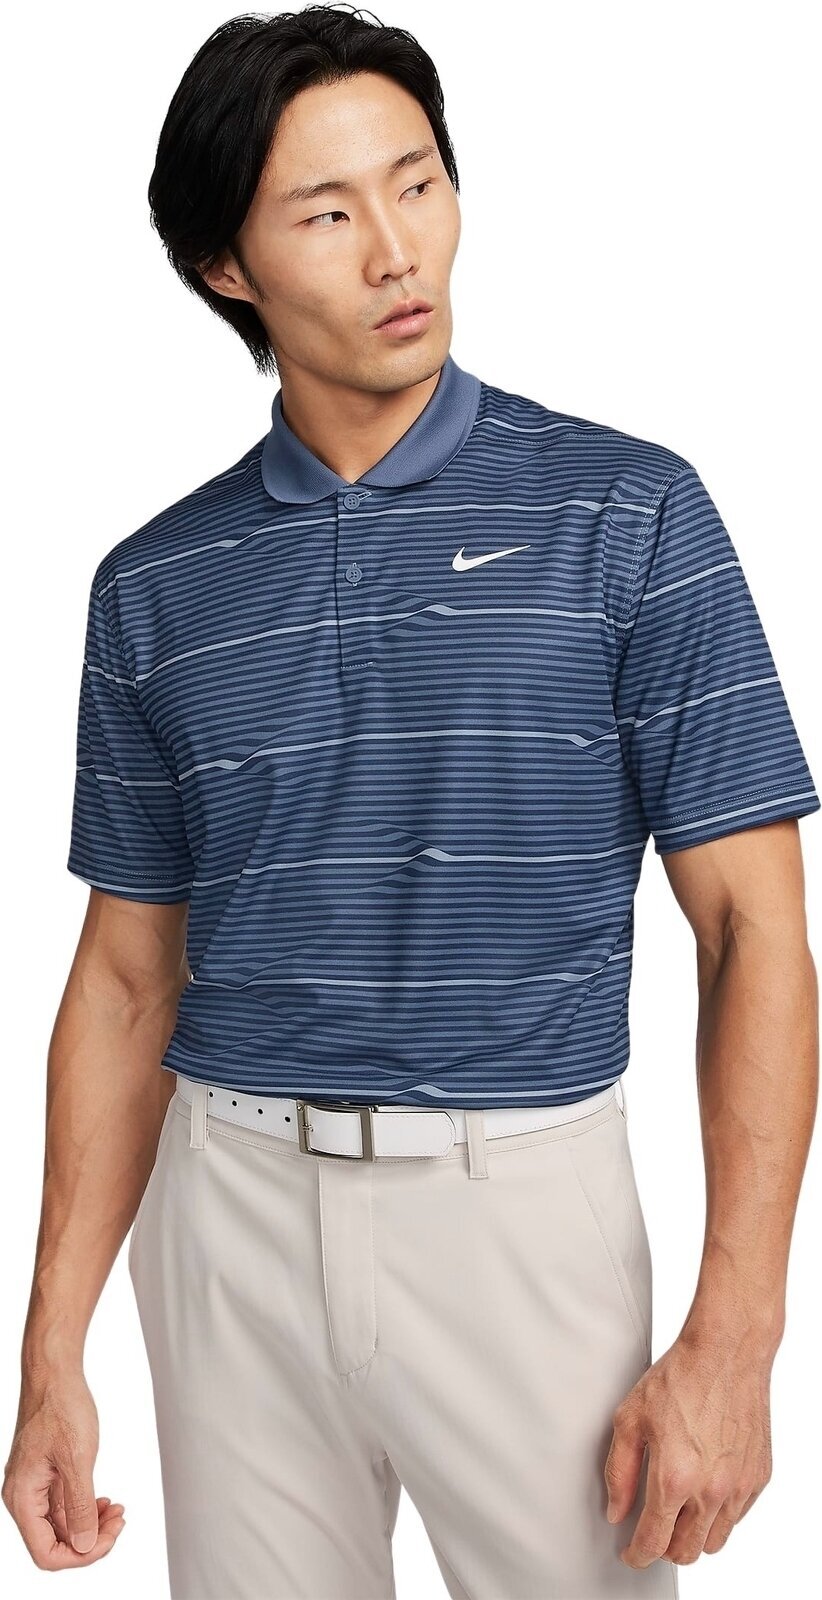 Polo Shirt Nike Dri-Fit Victory Ripple Mens Polo Midnight Navy/Diffused Blue/White S